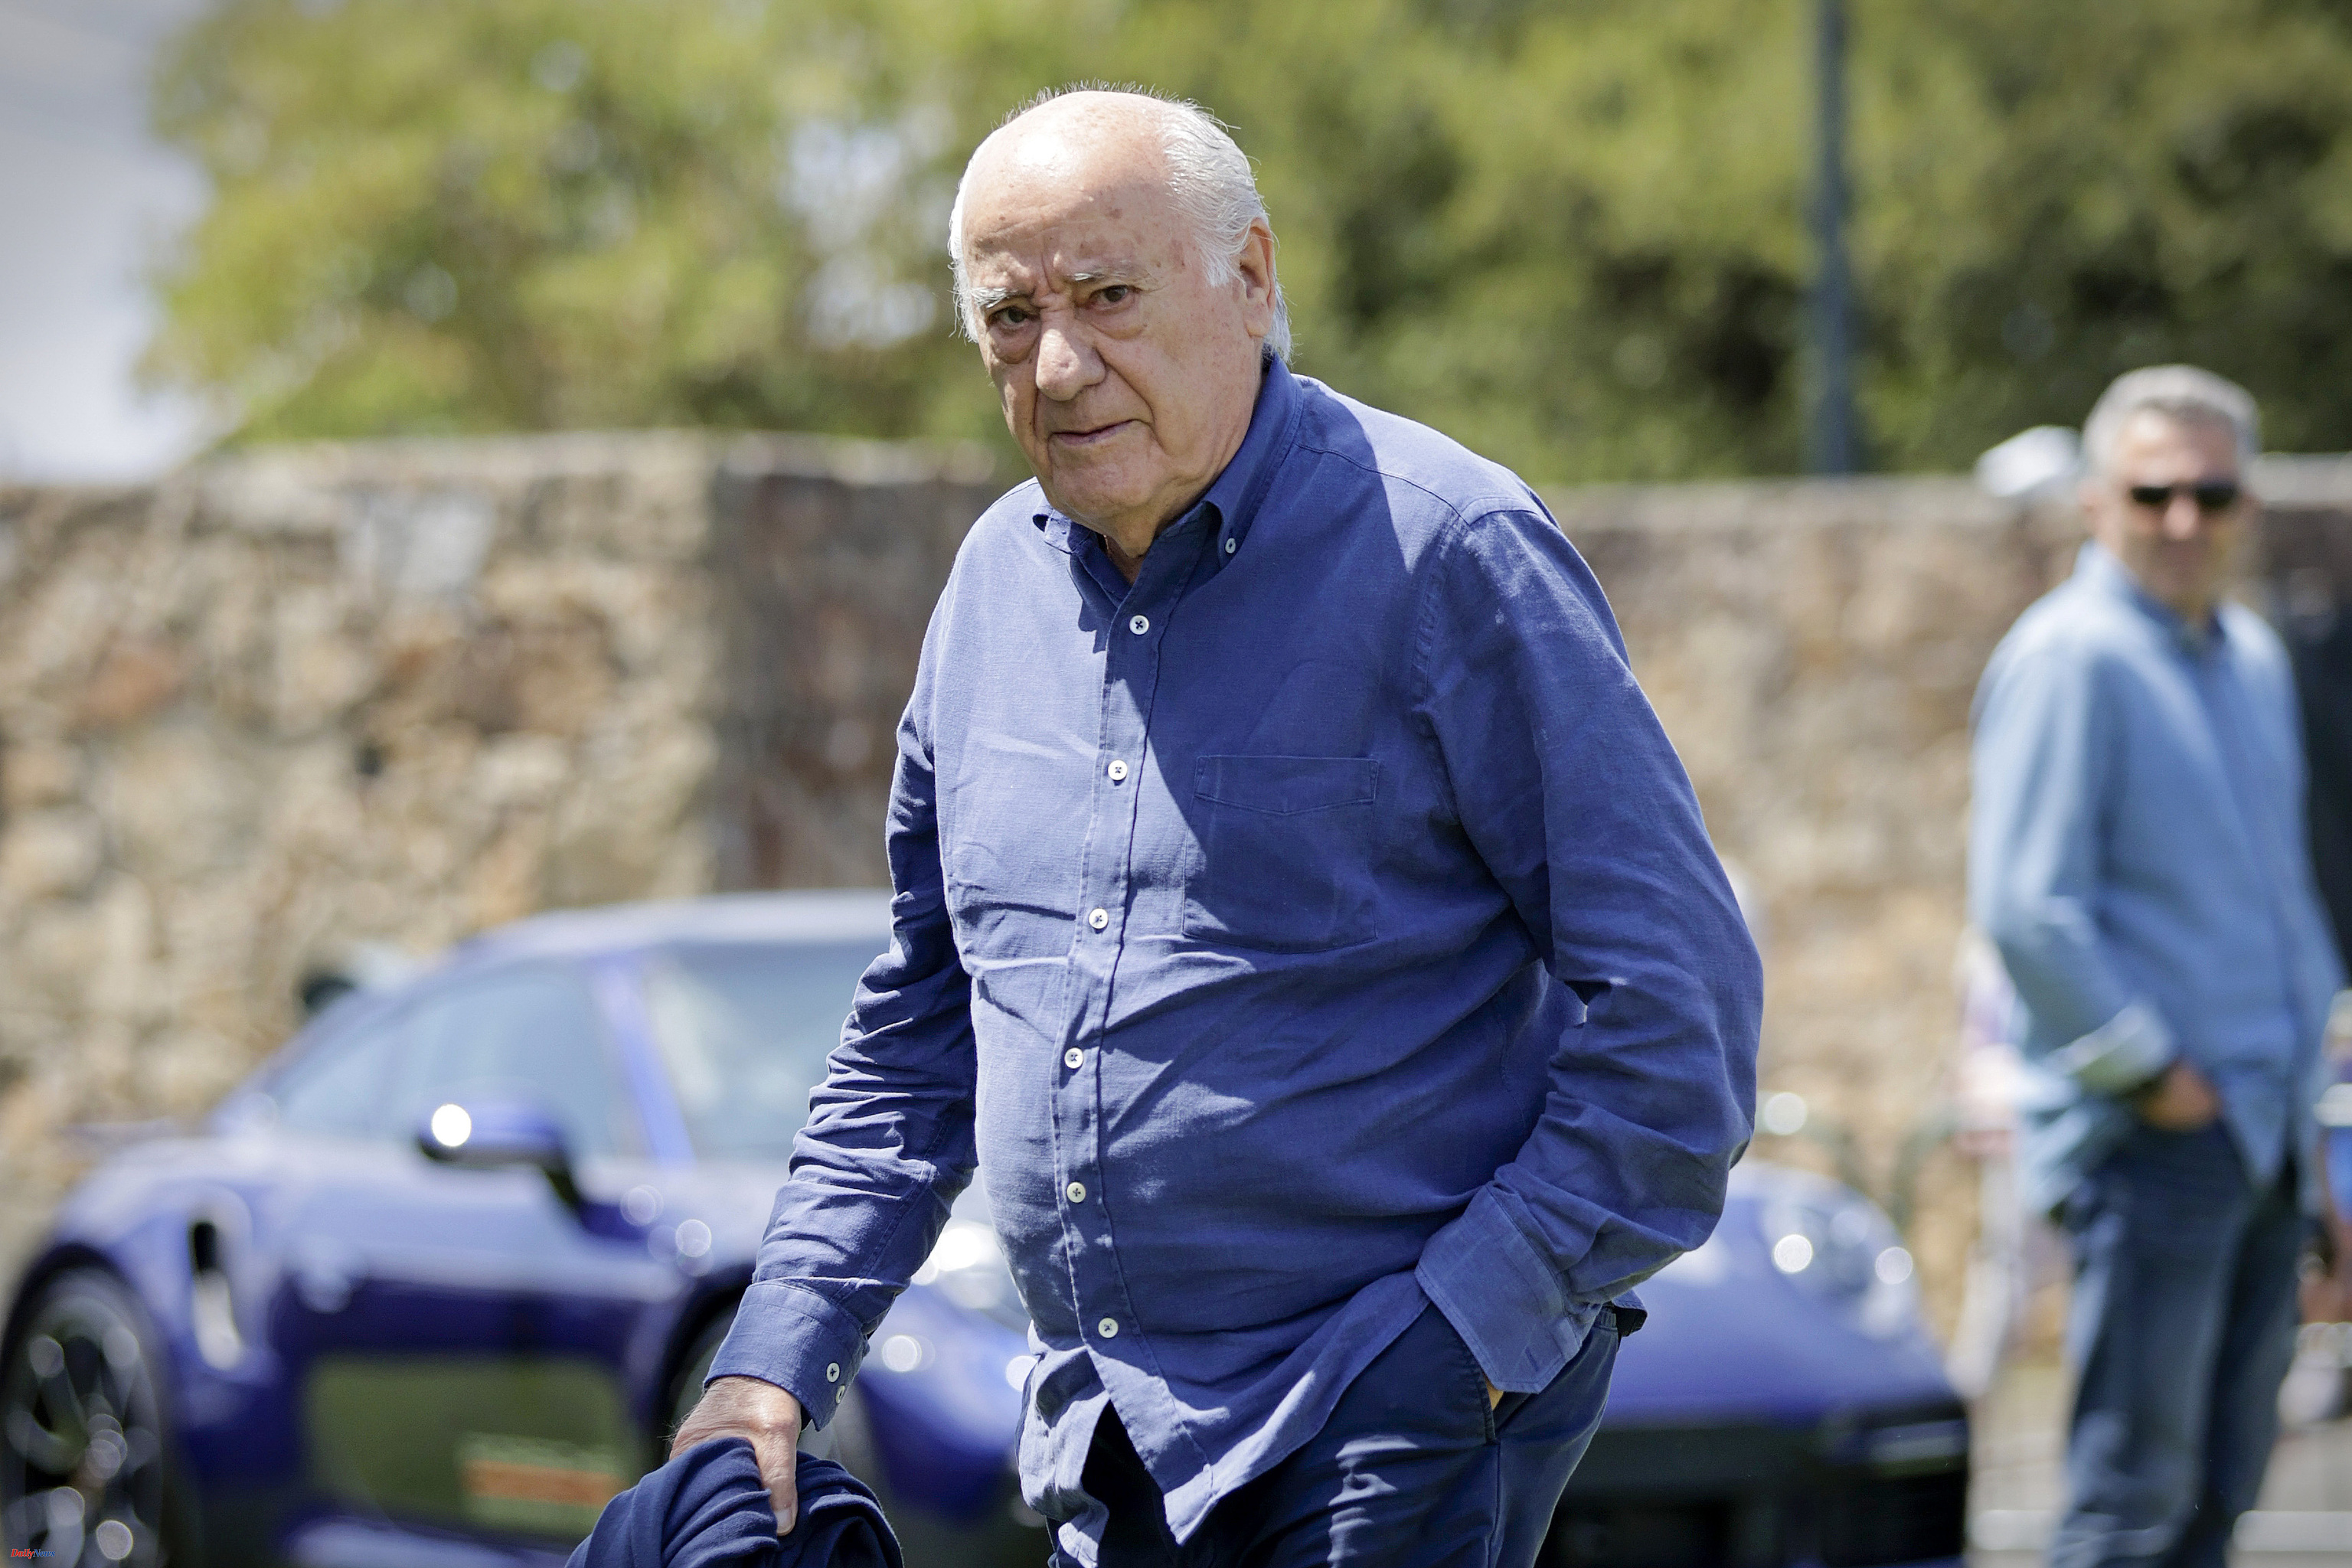 Economic News New record for Amancio Ortega: he is now the first Spaniard to exceed 100,000 million dollars in assets